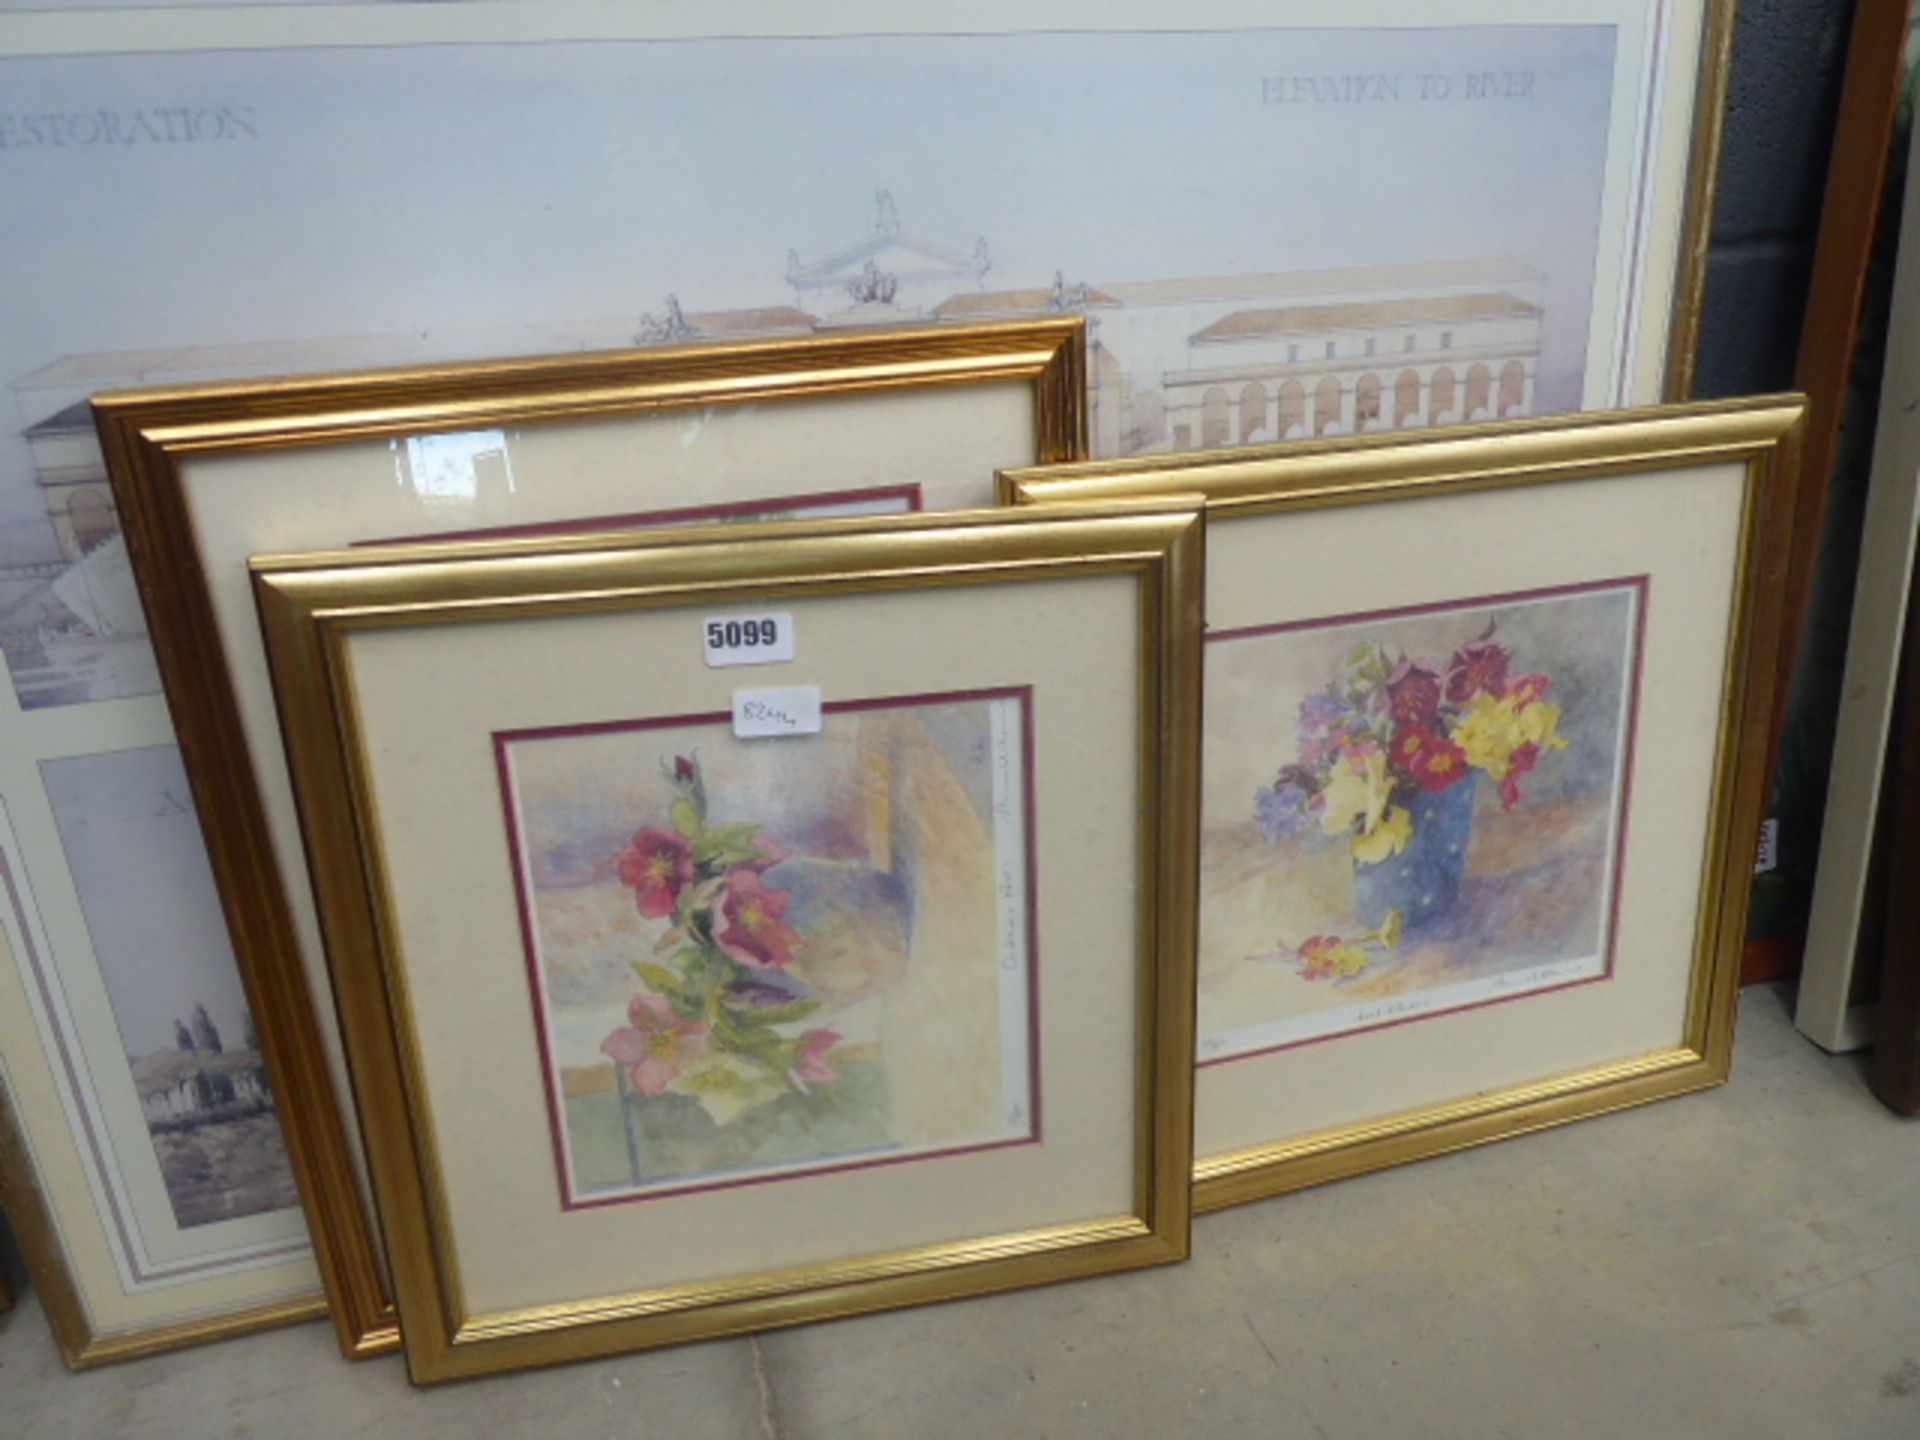 Collection of three prints of flowers